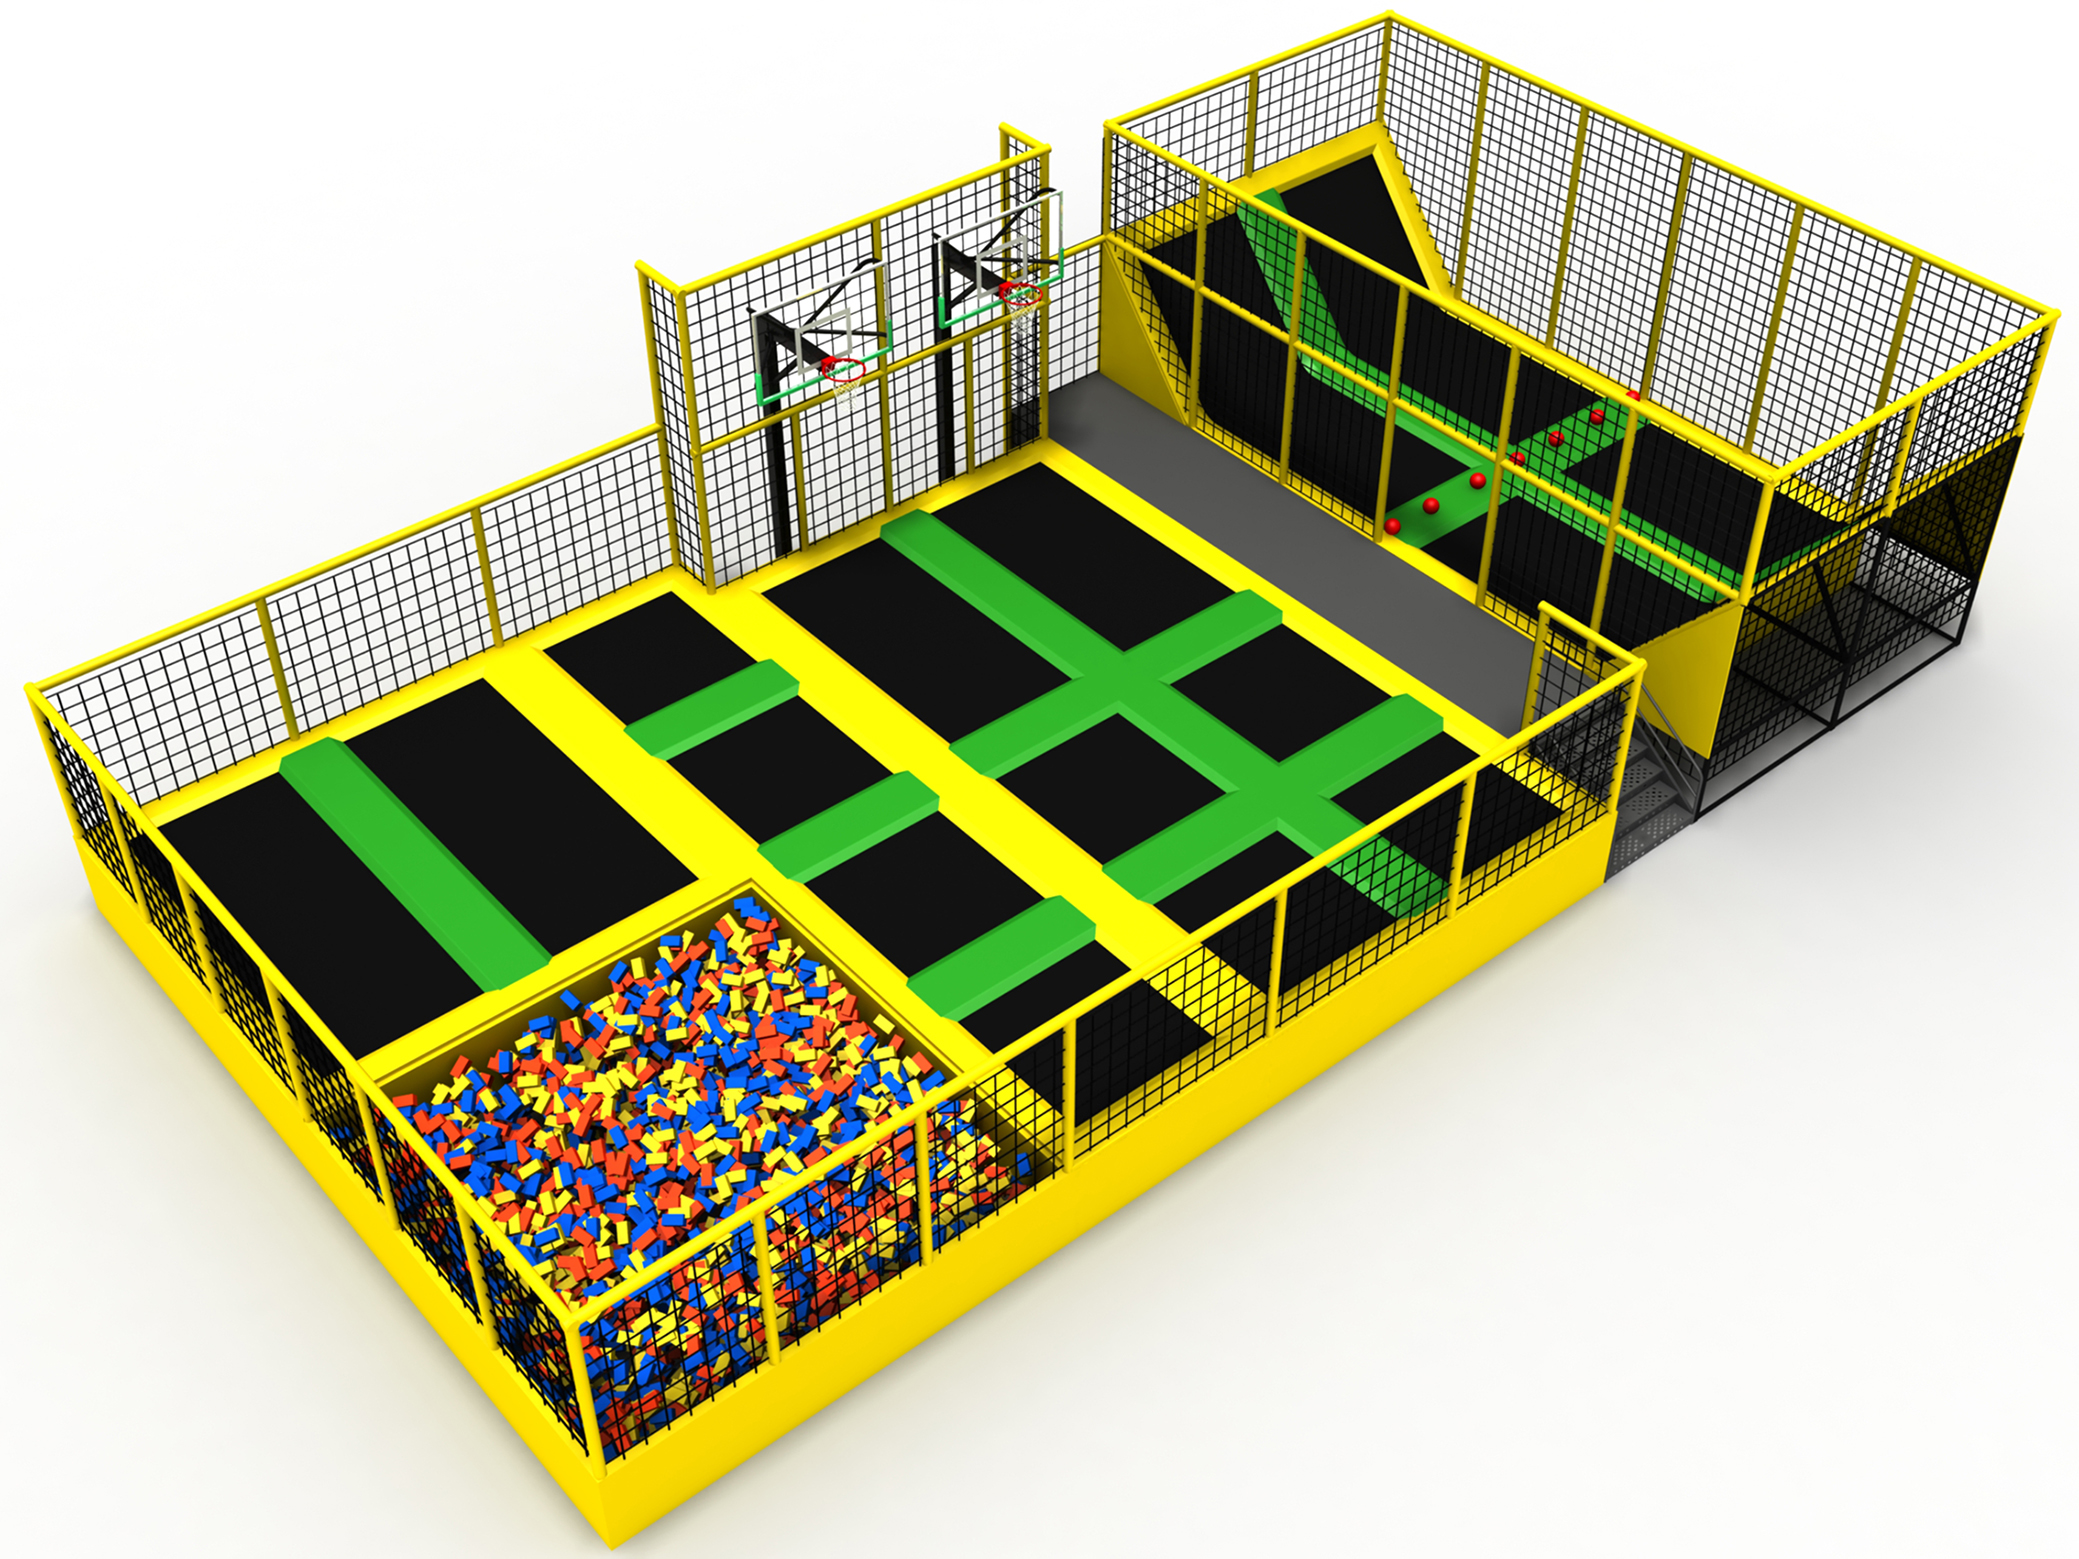 What are the amazing trampoline stunts in the trampoline park?